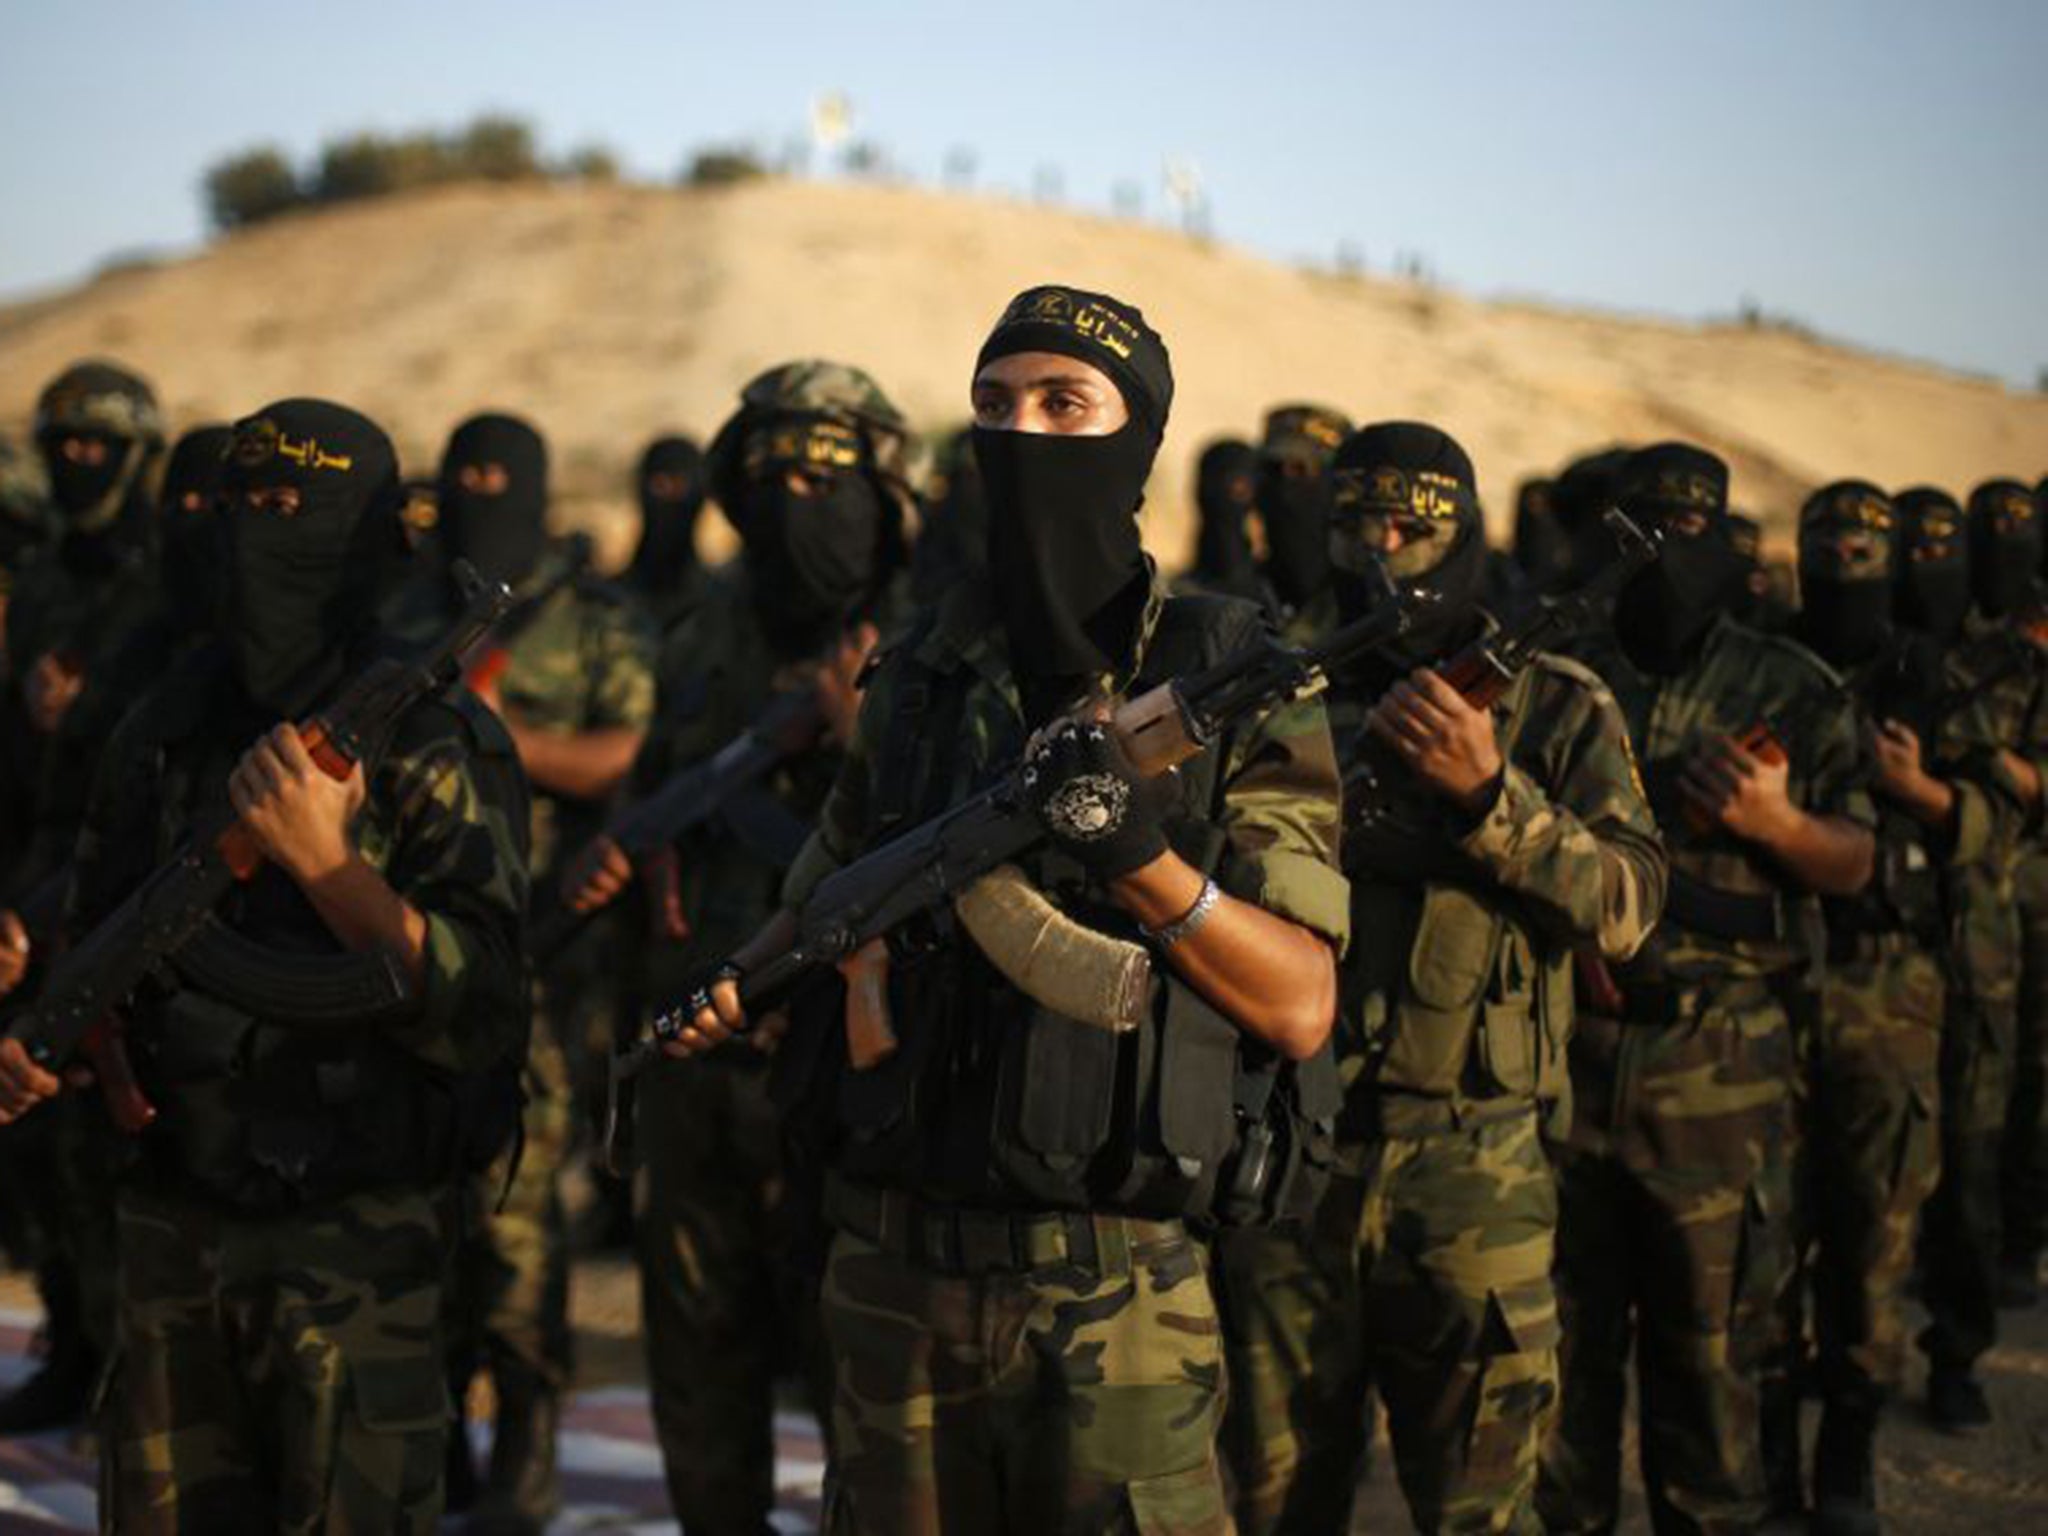 Palestinian Islamic Jihad militants march during a military drill in the southern Gaza Strip